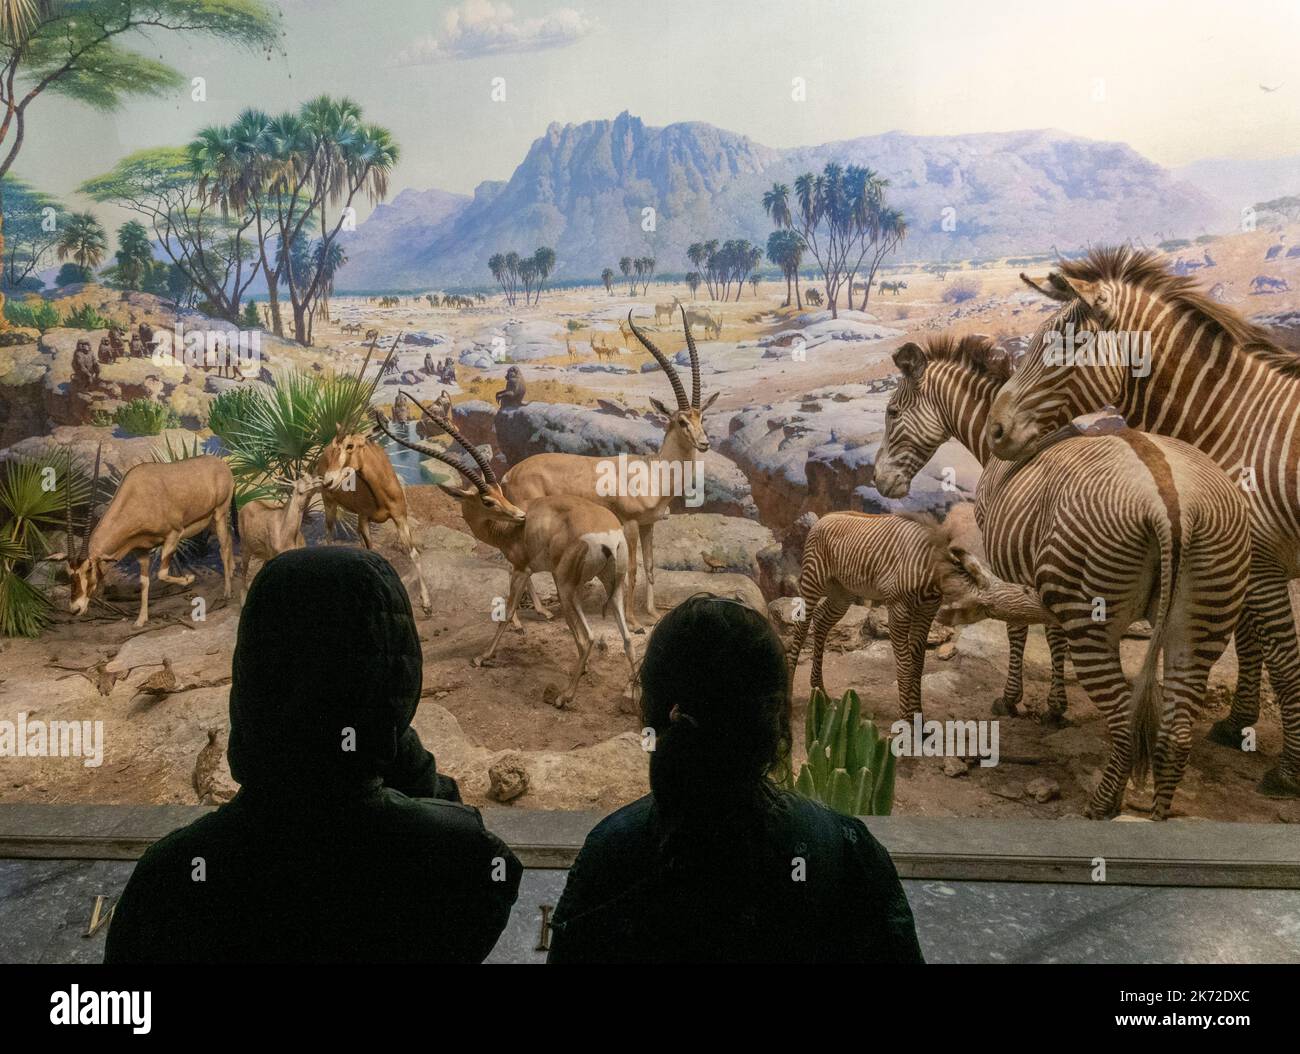 children watching diorama at the Akeley Hall of African Mammals,  American Museum of Natural History, New York City, USA Stock Photo